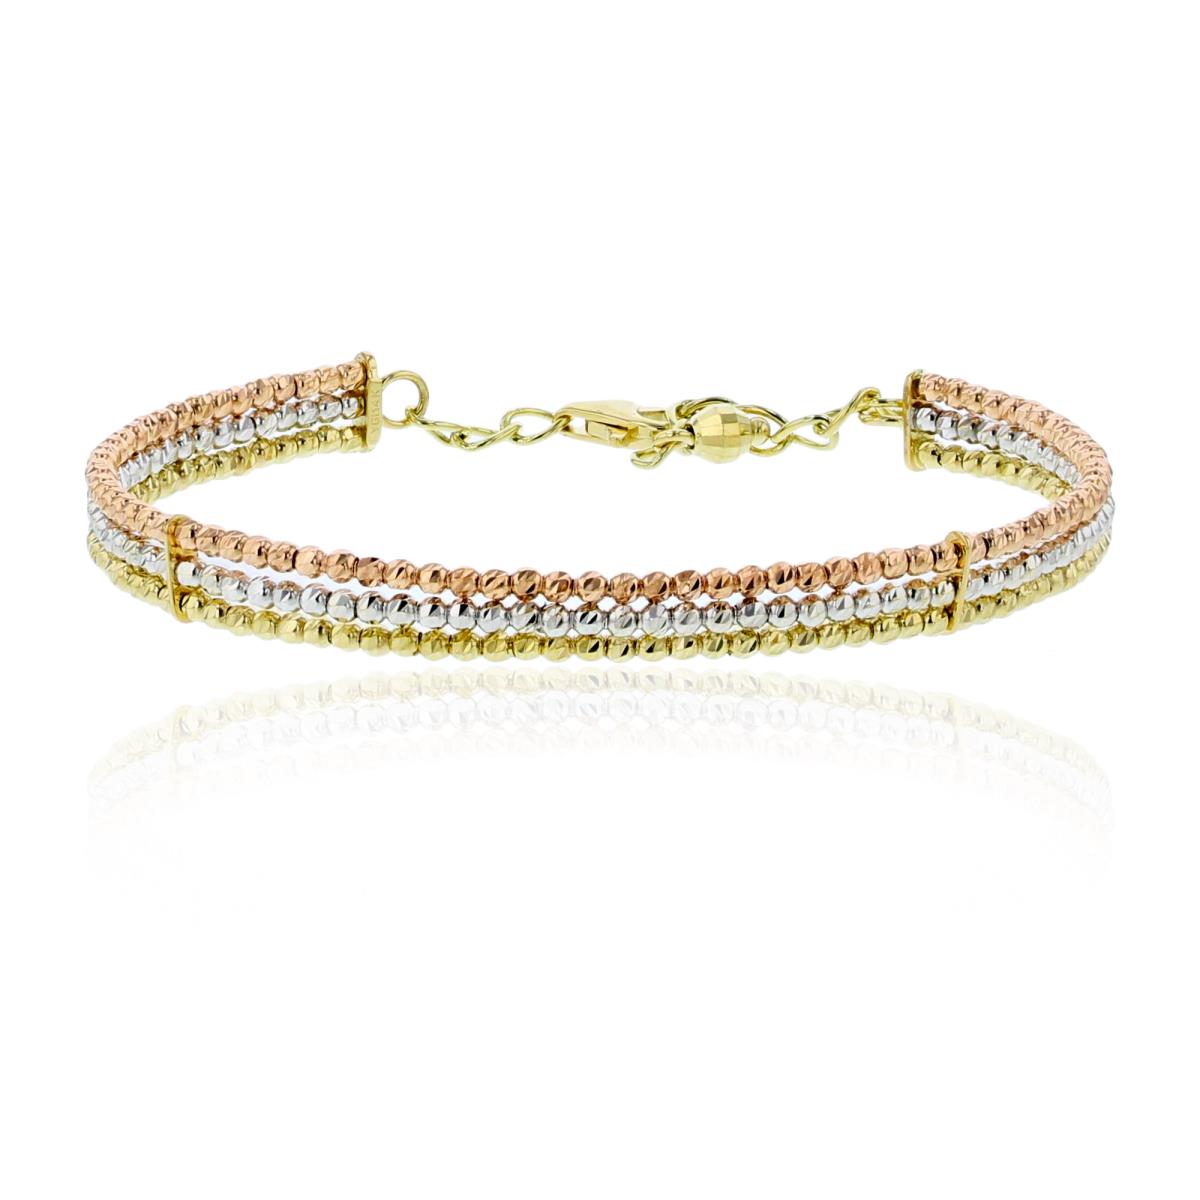 14K Tri-Color Gold 3-Row Diamond Cut Beaded 6mm Wide Bangle Bracelet with 1" Extender